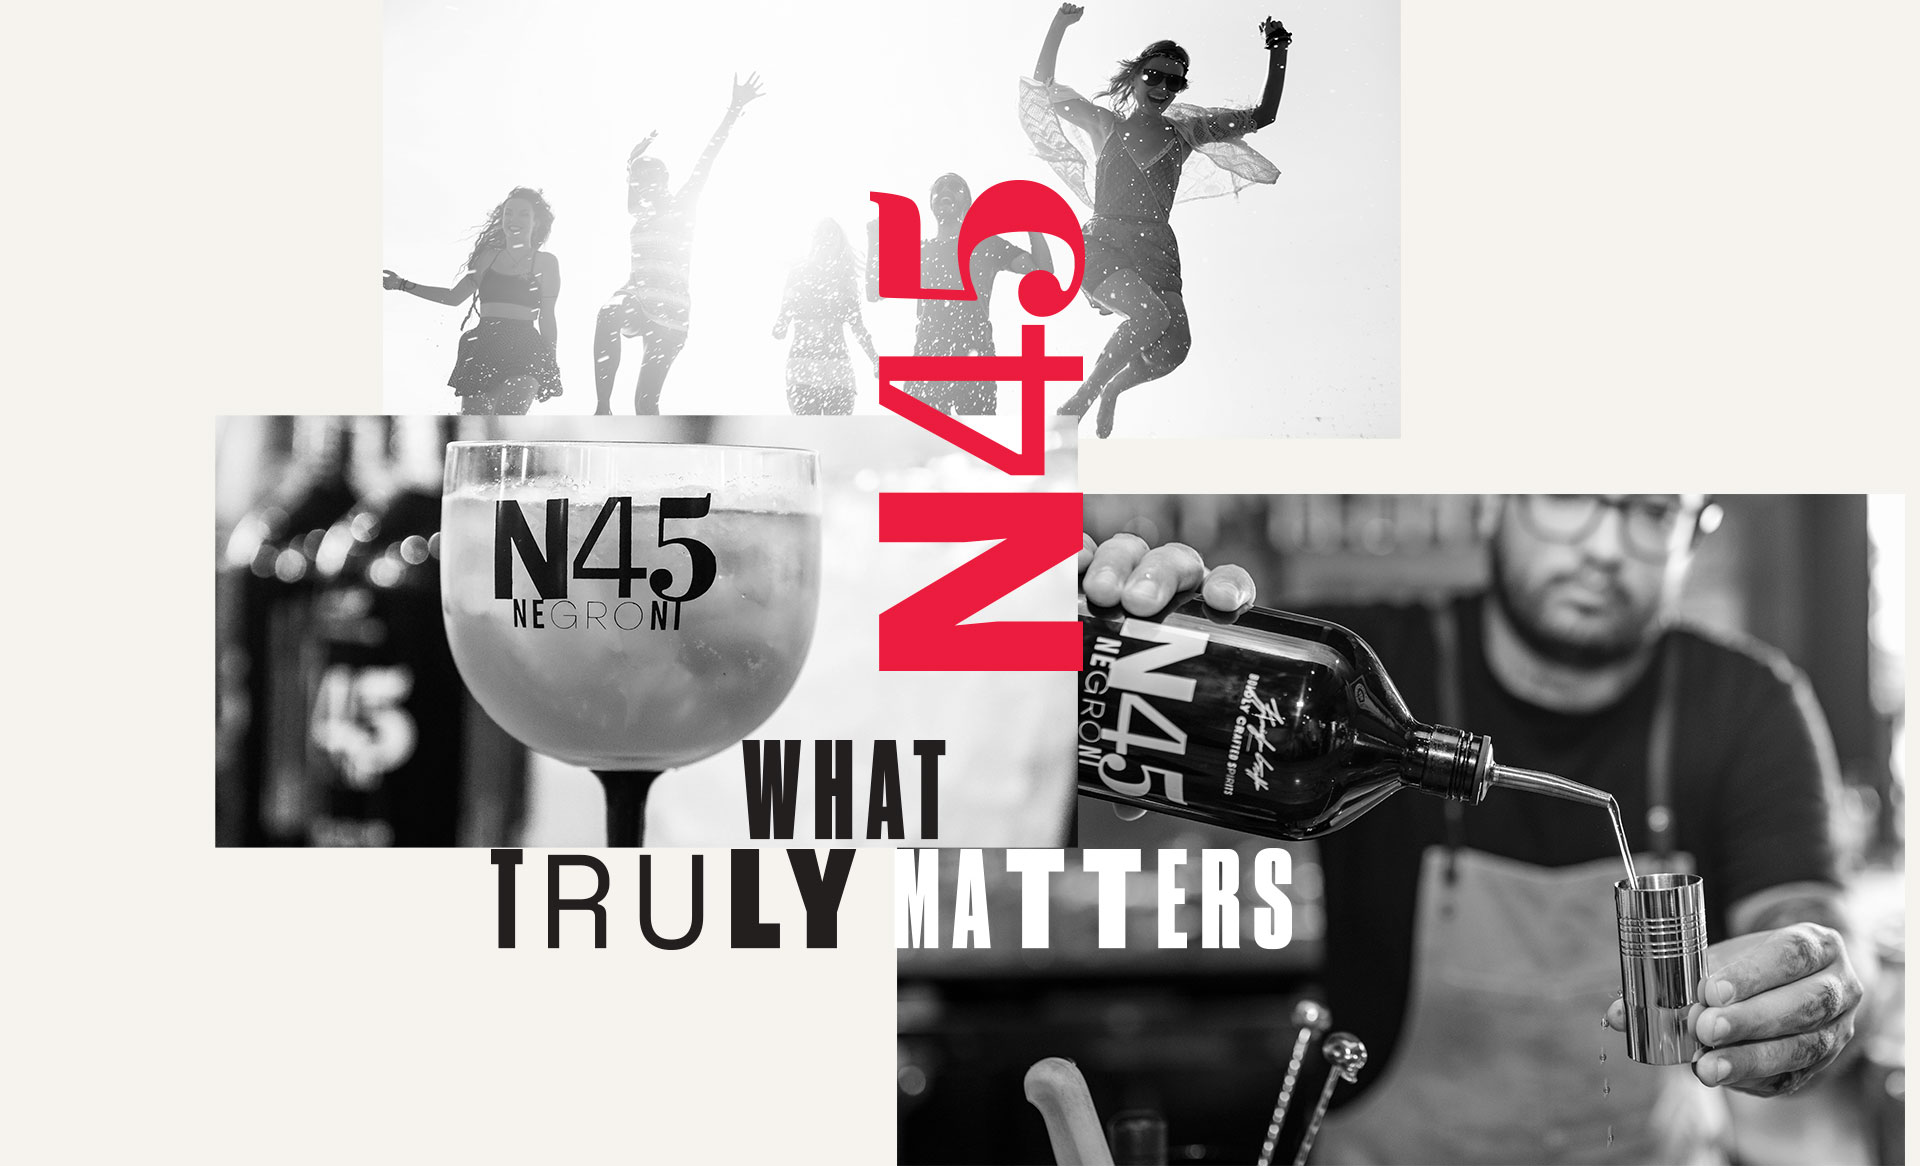 Negroni N45 - What Truly Matters